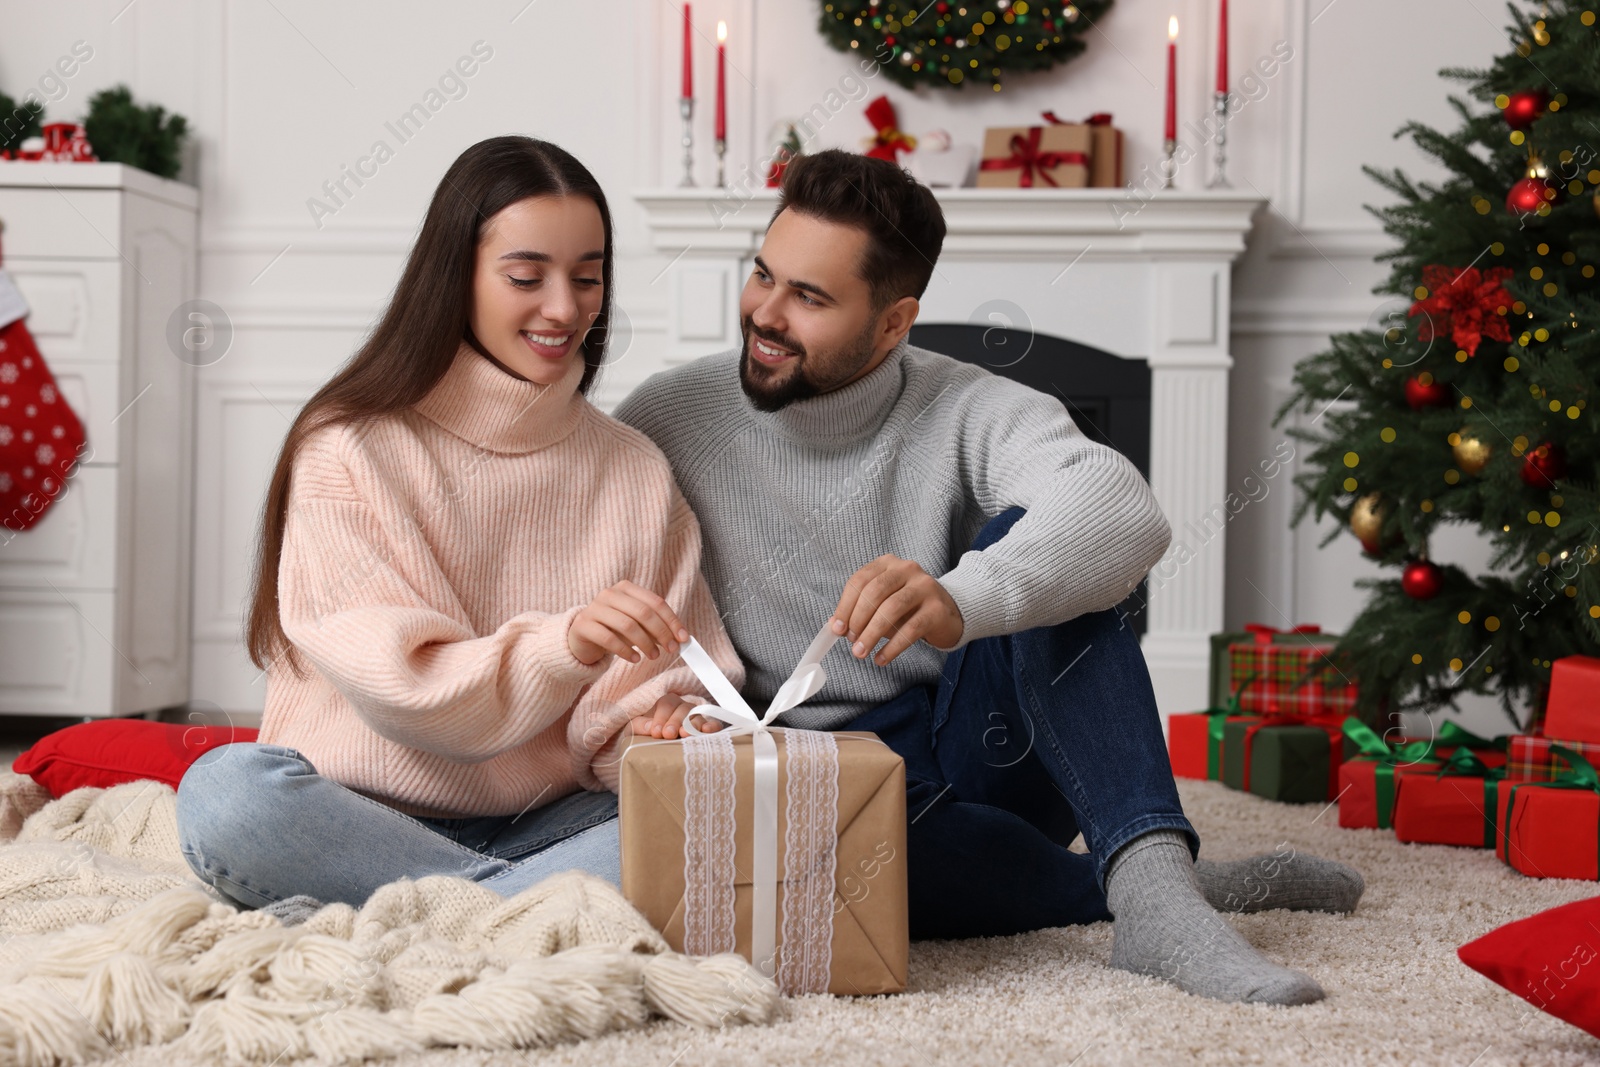 Photo of Happy young couple opening Christmas gift at home